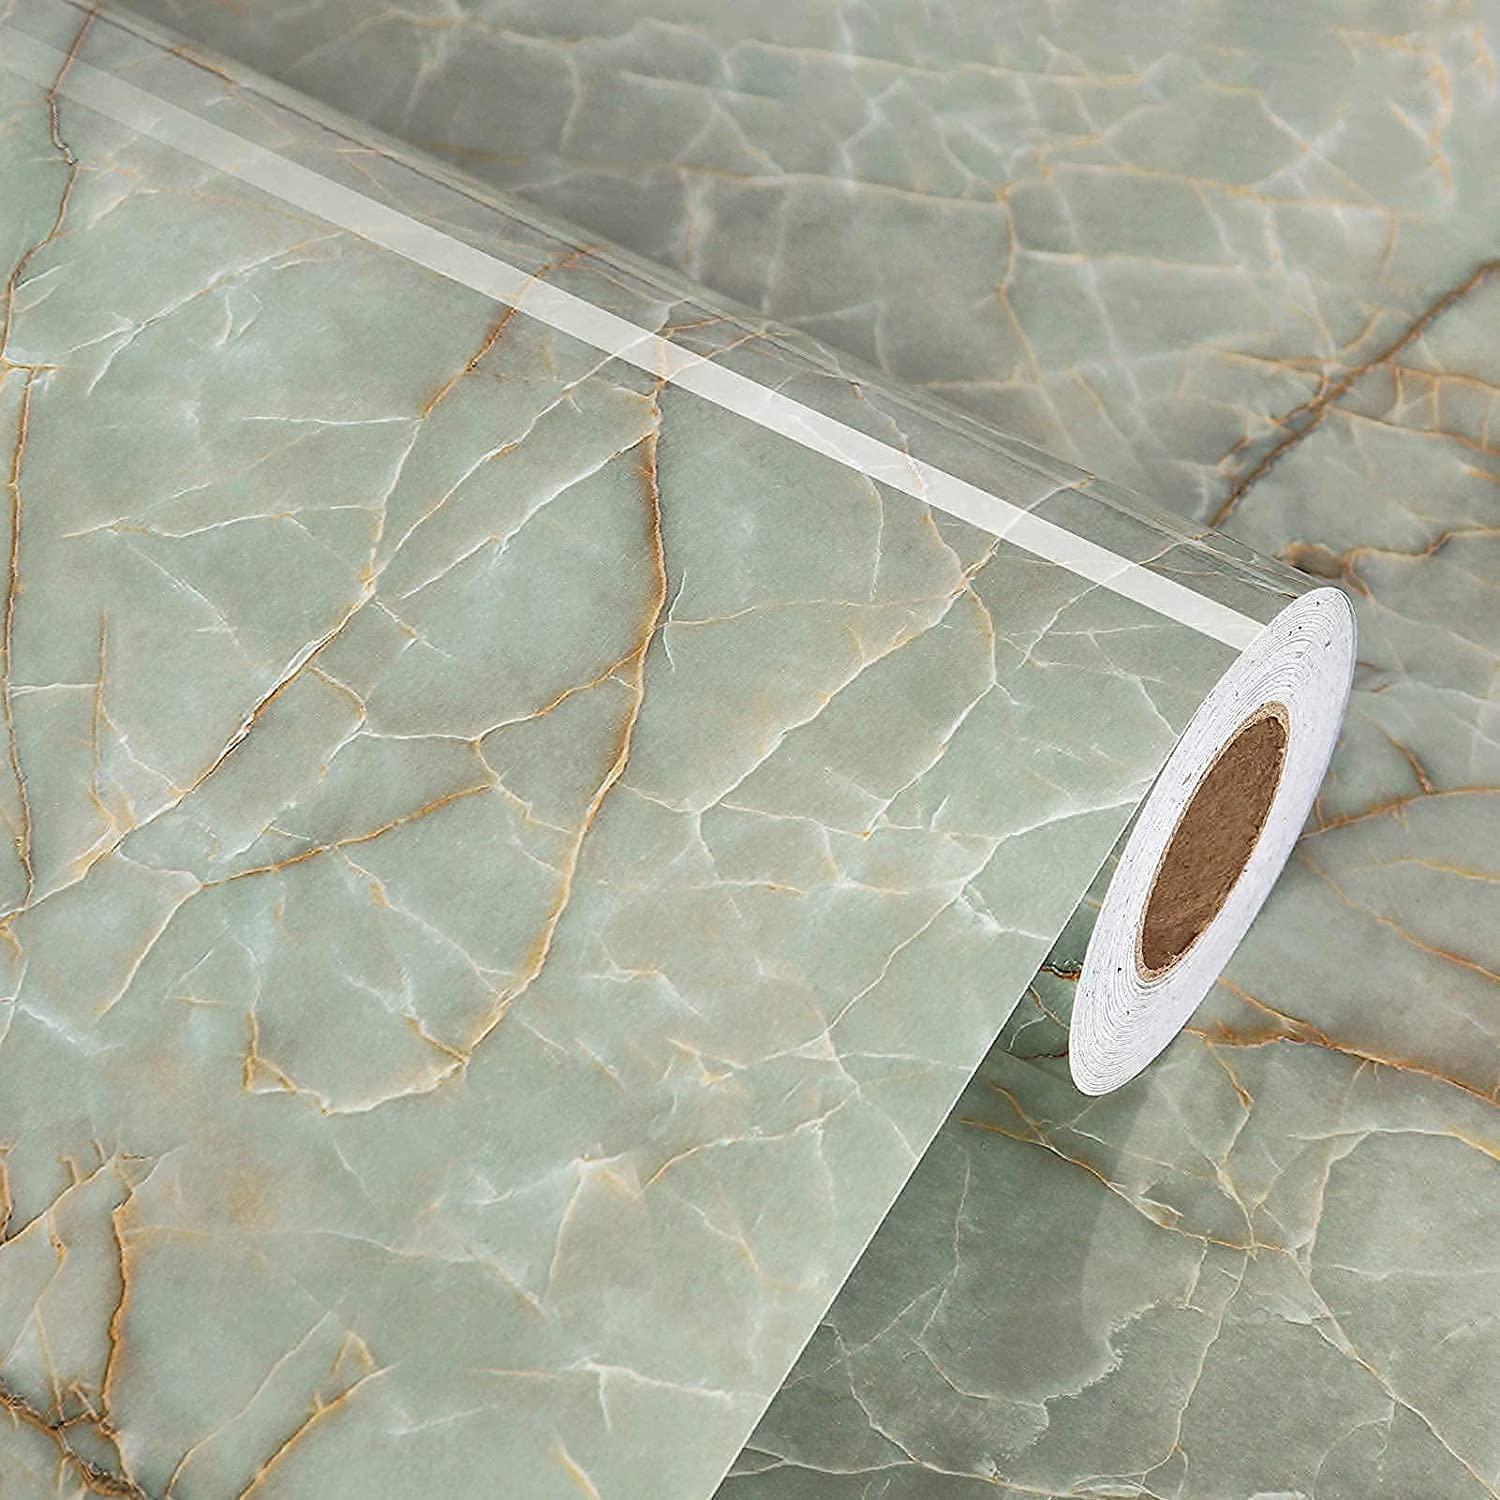 LiKiLiKi, LIKILIKI 15.75 x 472 Green Marble Contact Paper for Countertops Waterproof Marble Wallpaper Peel and Stick Countertops Self Adhesve Contact Paper for Cabinets Removable Counter Top Stick Paper Roll